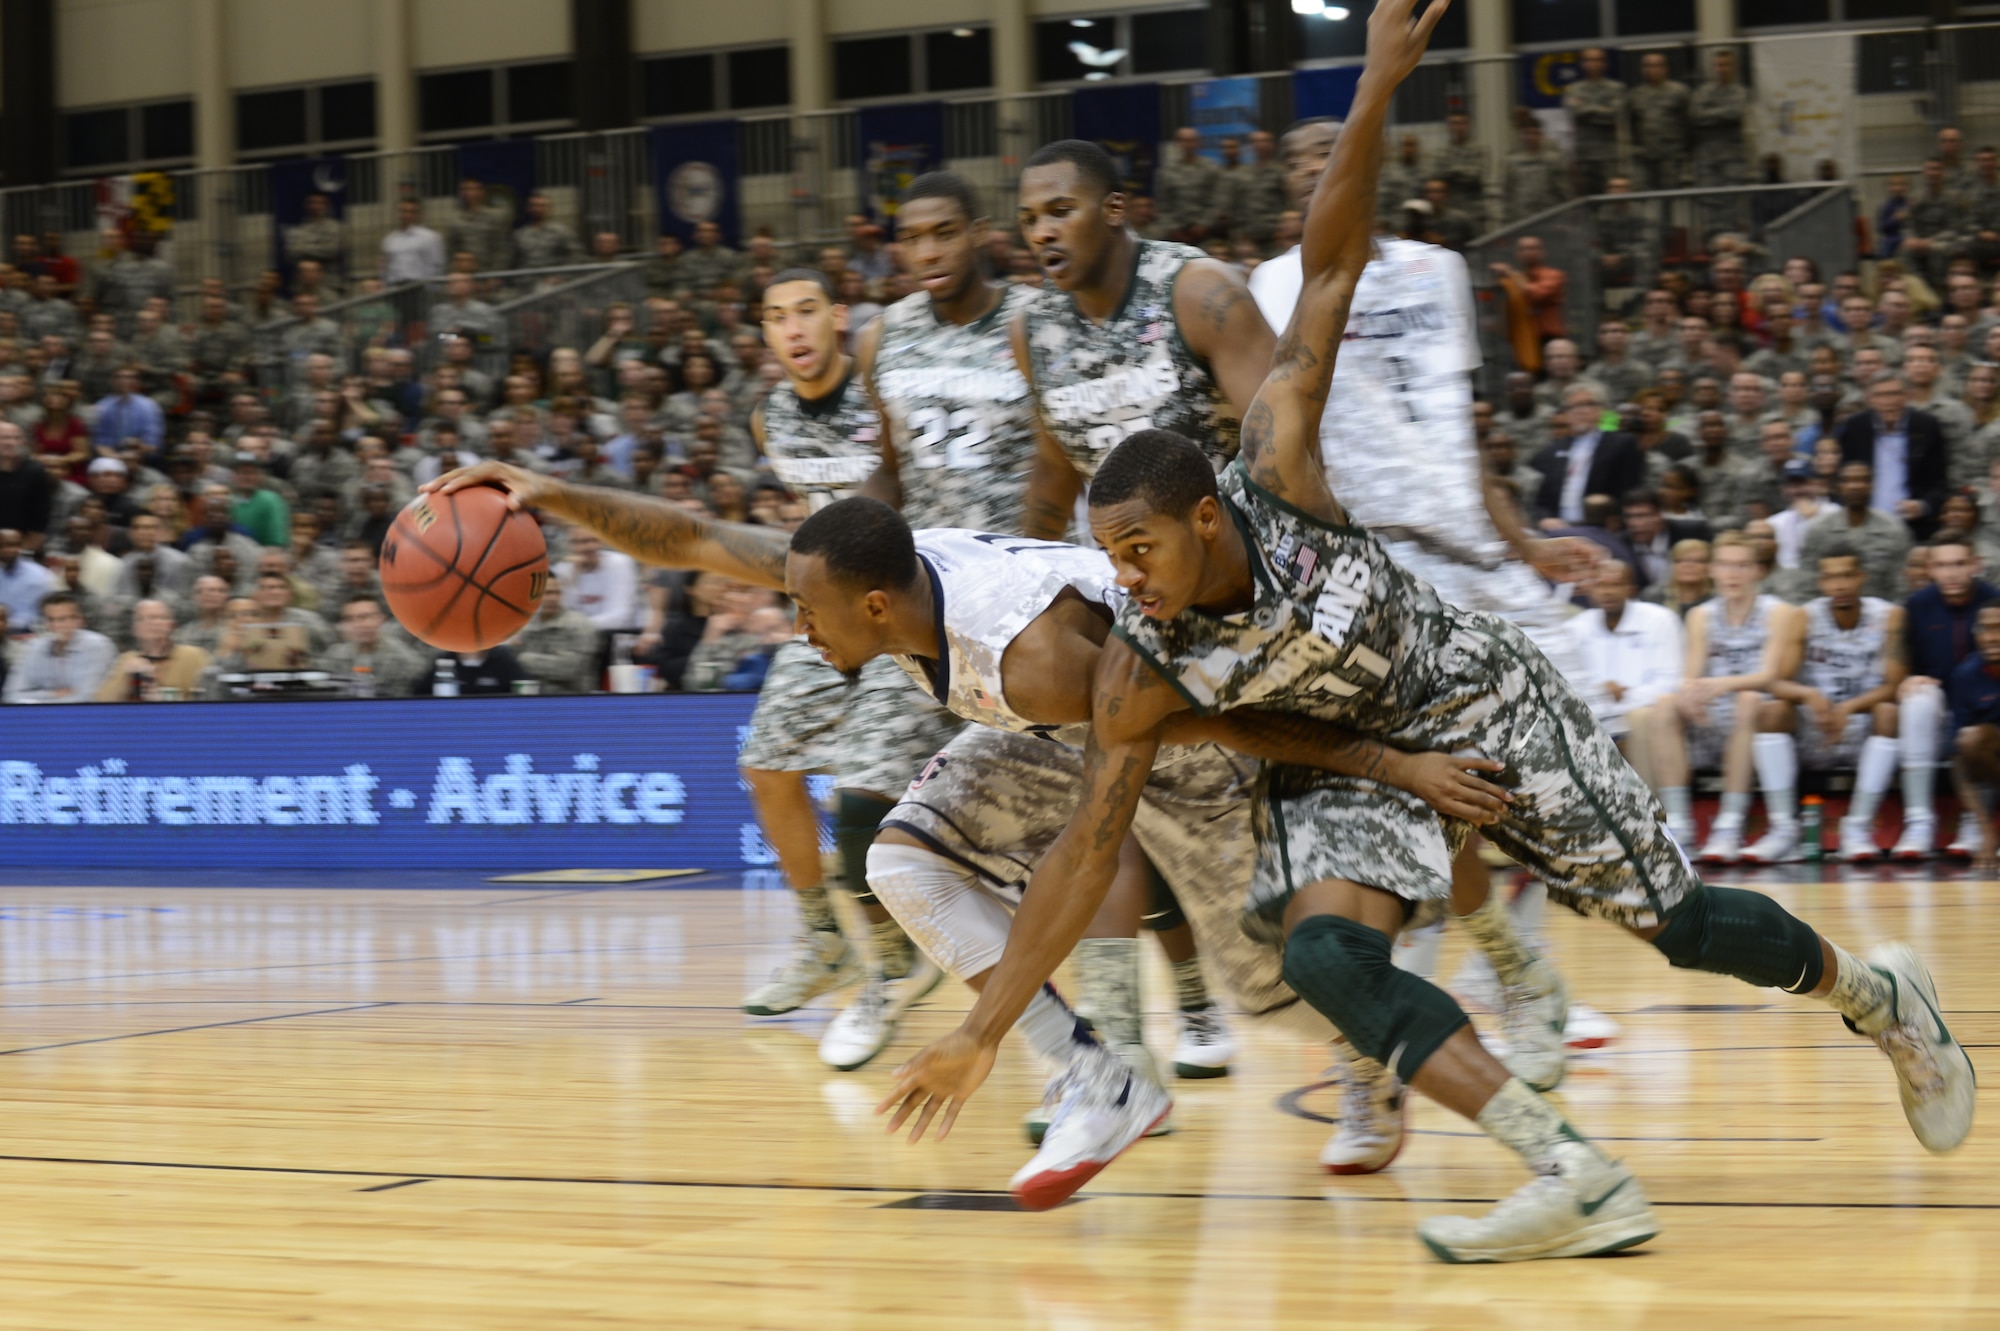 Ryan Boatright, University of Conneticut point guard, defends the ball from an opponent during the 2012 Armed Forces Classic on Ramstein Air Base, Germany, Nov. 10, 2012. The match-up between Michigan State and UCONN is part of ESPN's Veteran's week initiative to honor the men and women who have served and are still serving in the U.S. military. (U.S. Air Force photo/Senior Airman Caitlin O’Neil-McKeown)